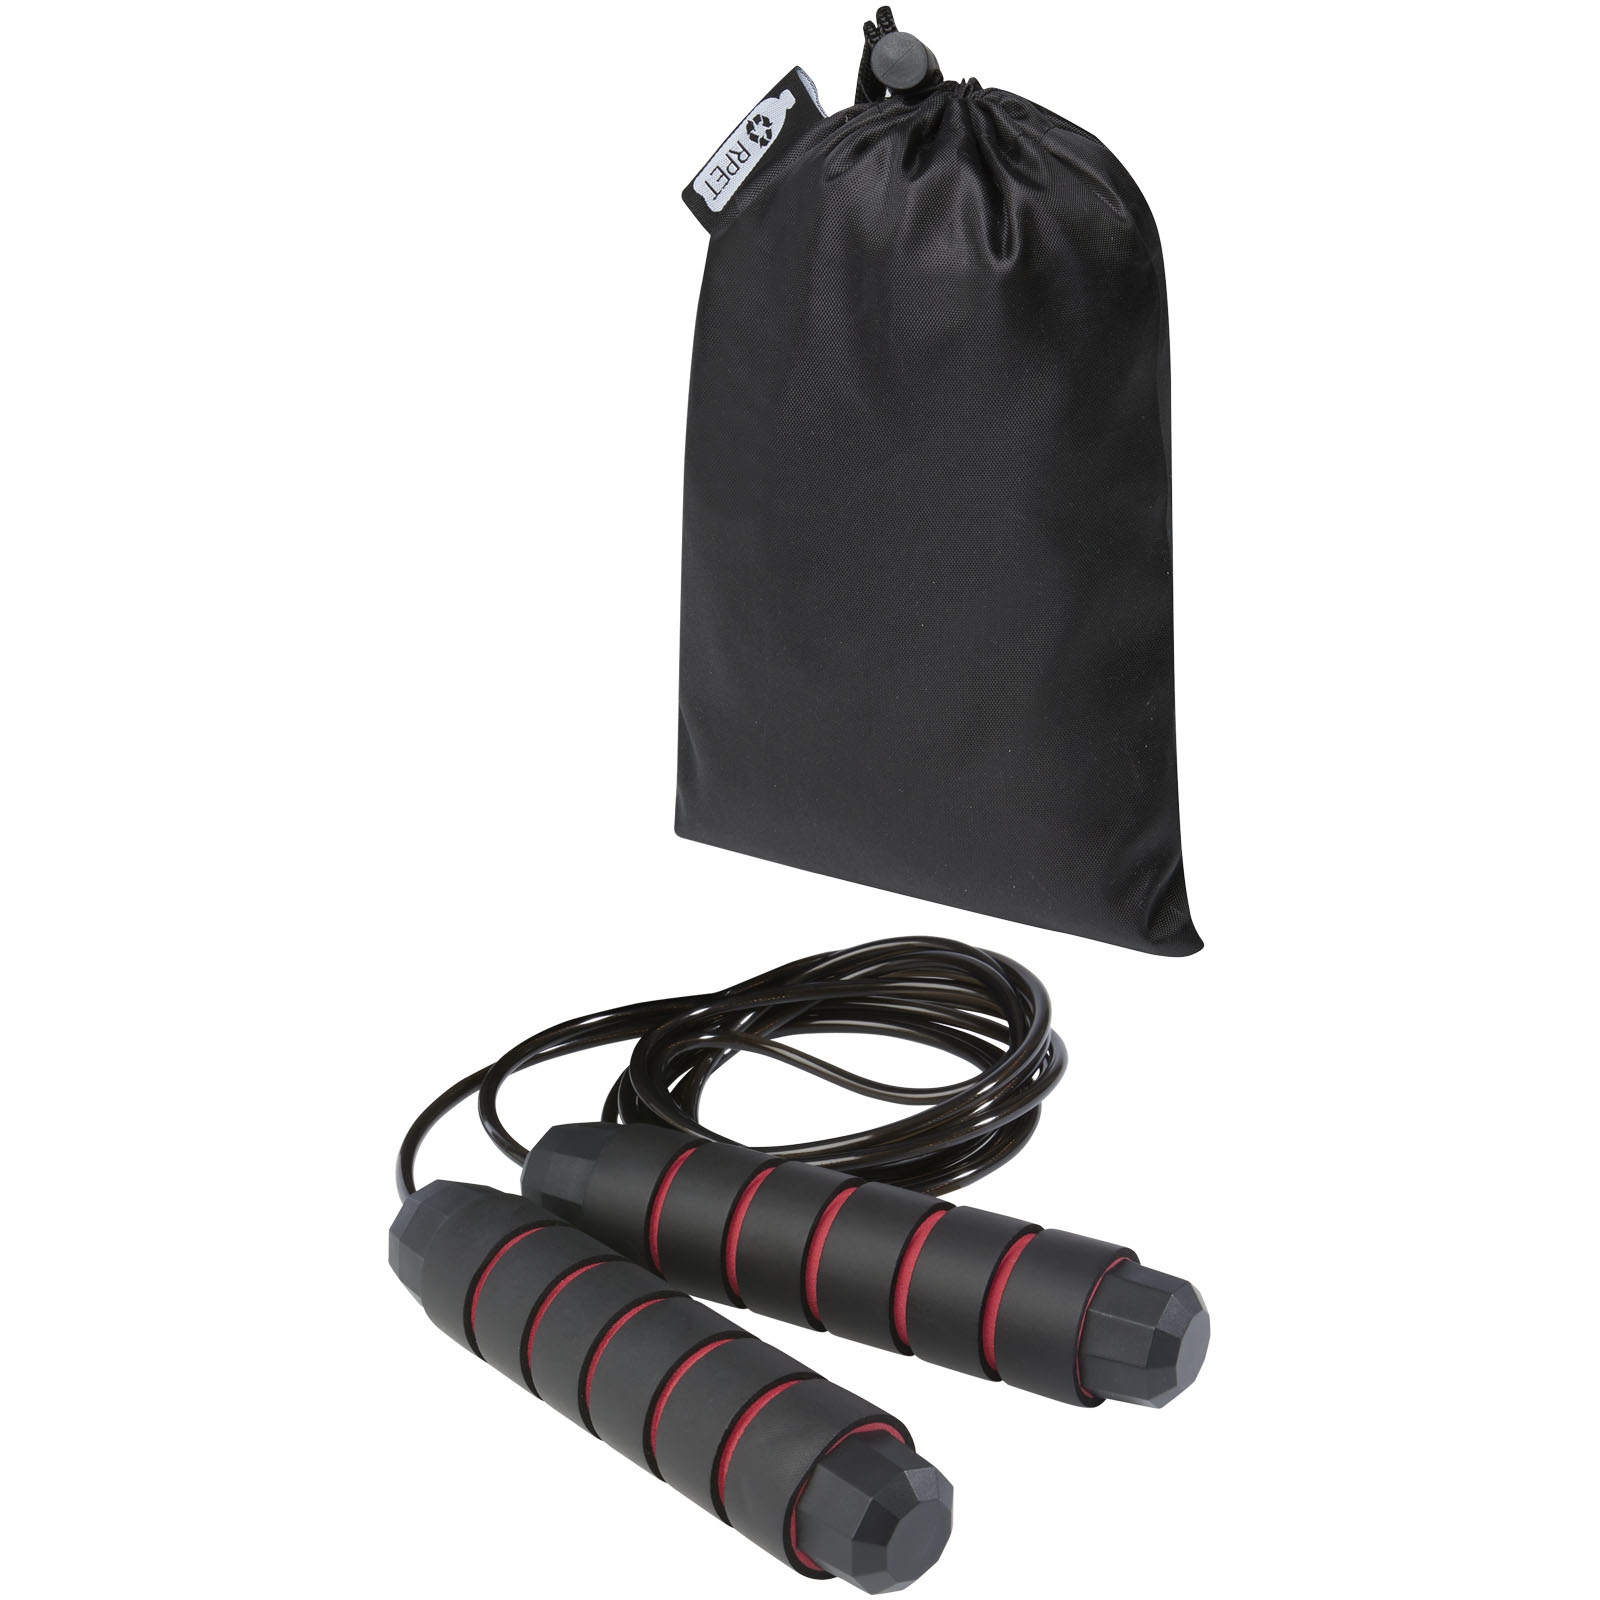 Advertising Fitness & Sport - Austin soft skipping rope in recycled PET pouch - 0